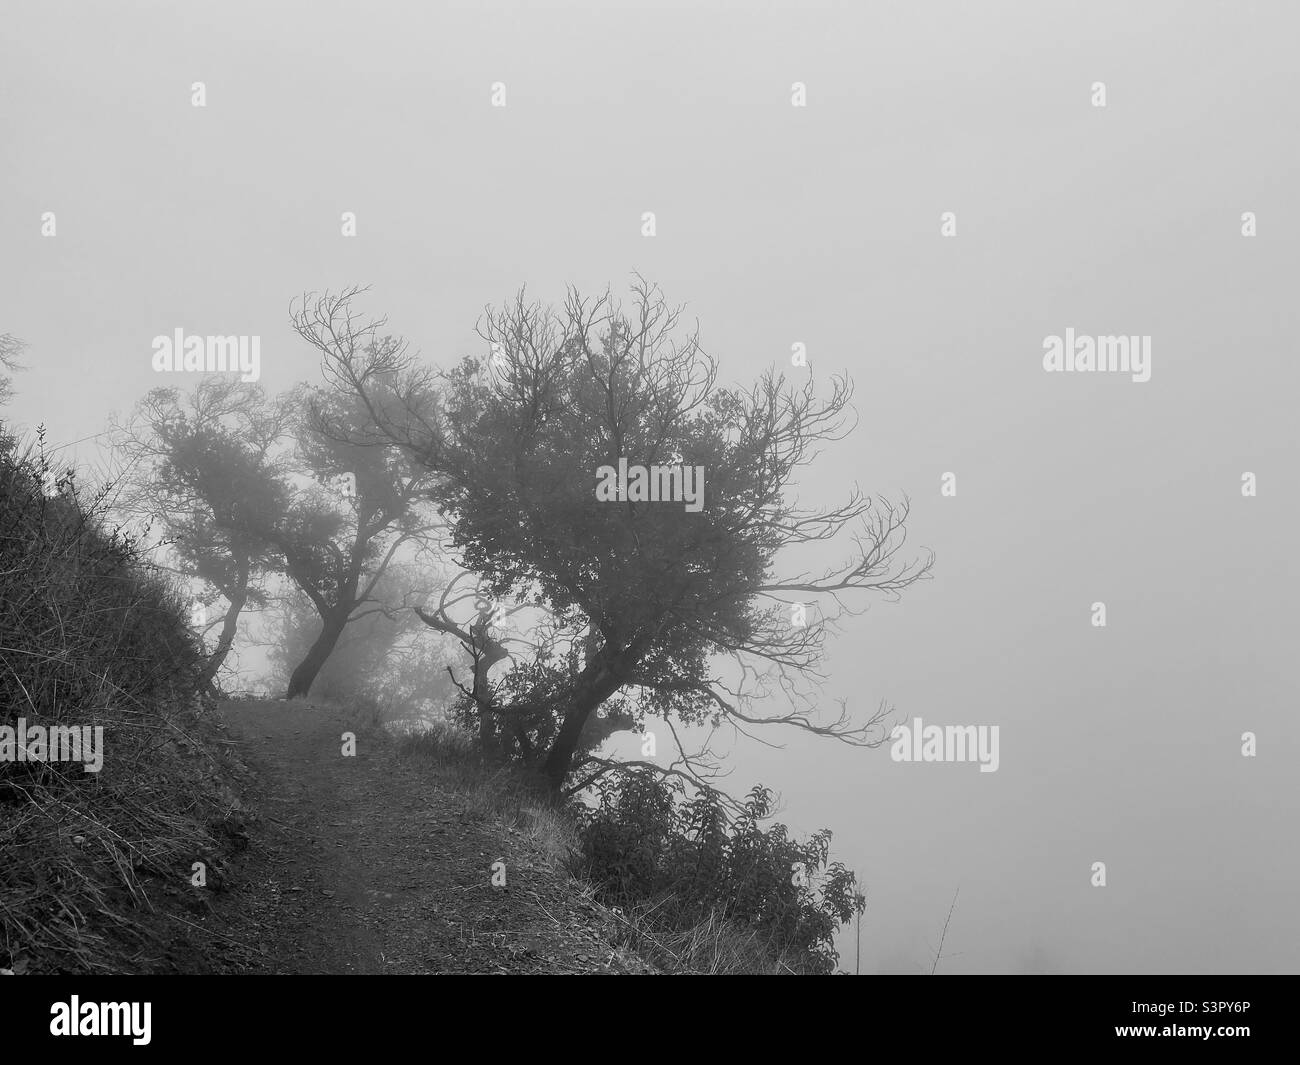 Trees growing at angle on hill, isolated in fog on the Backbone Trail through Santa Monica Mountains, Southern California. Black and white Stock Photo